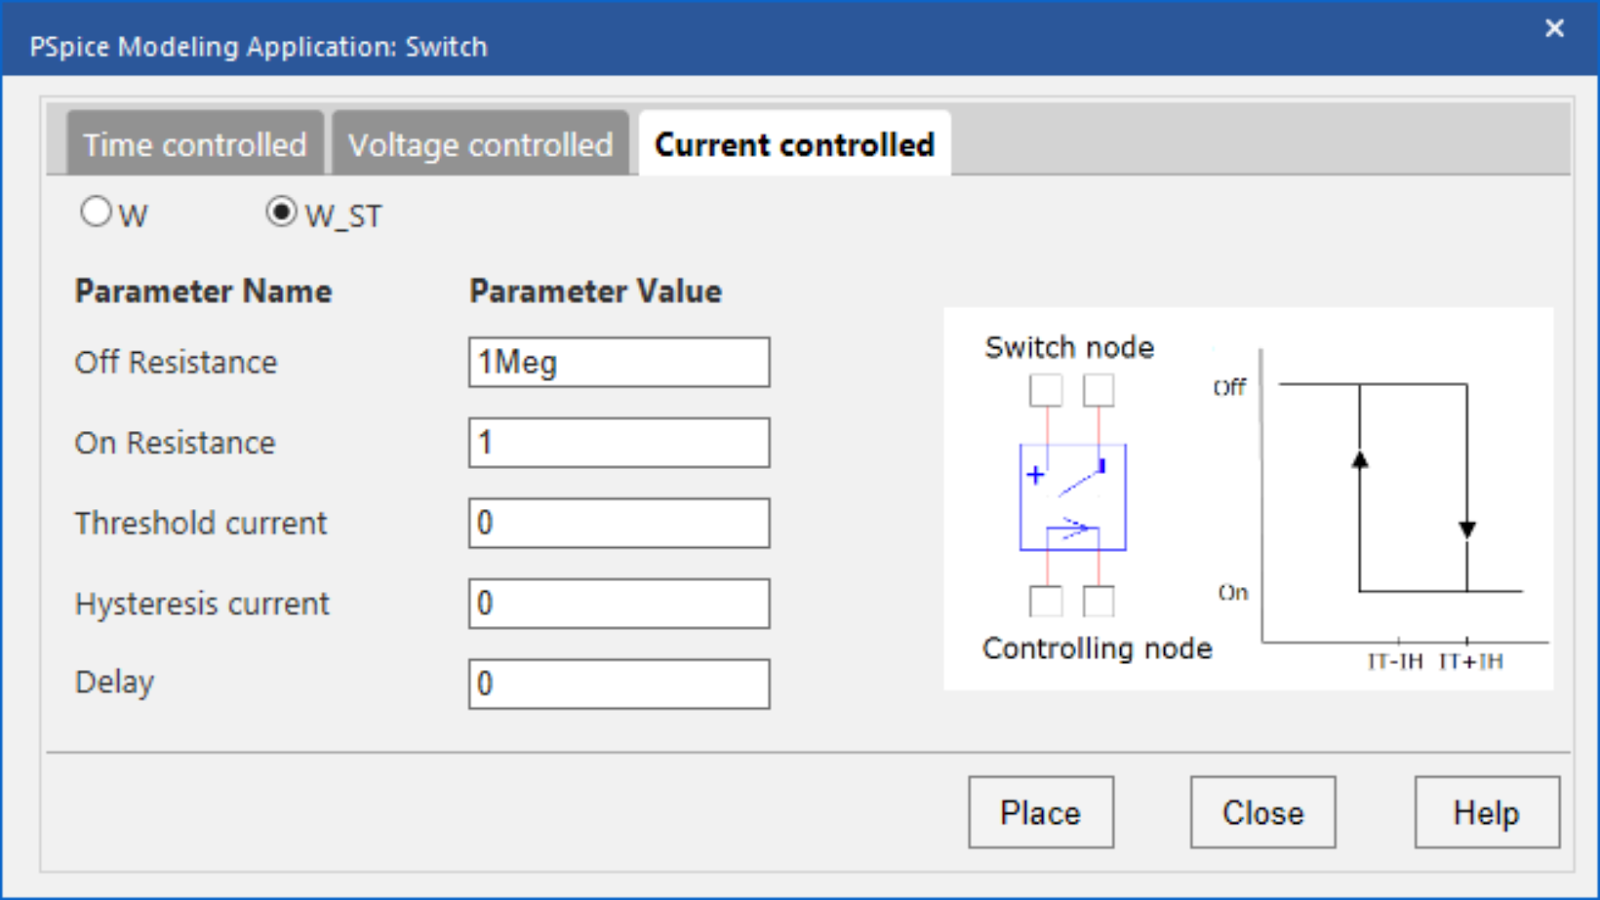 Create a switch SPICE model with the PSpice modeling application